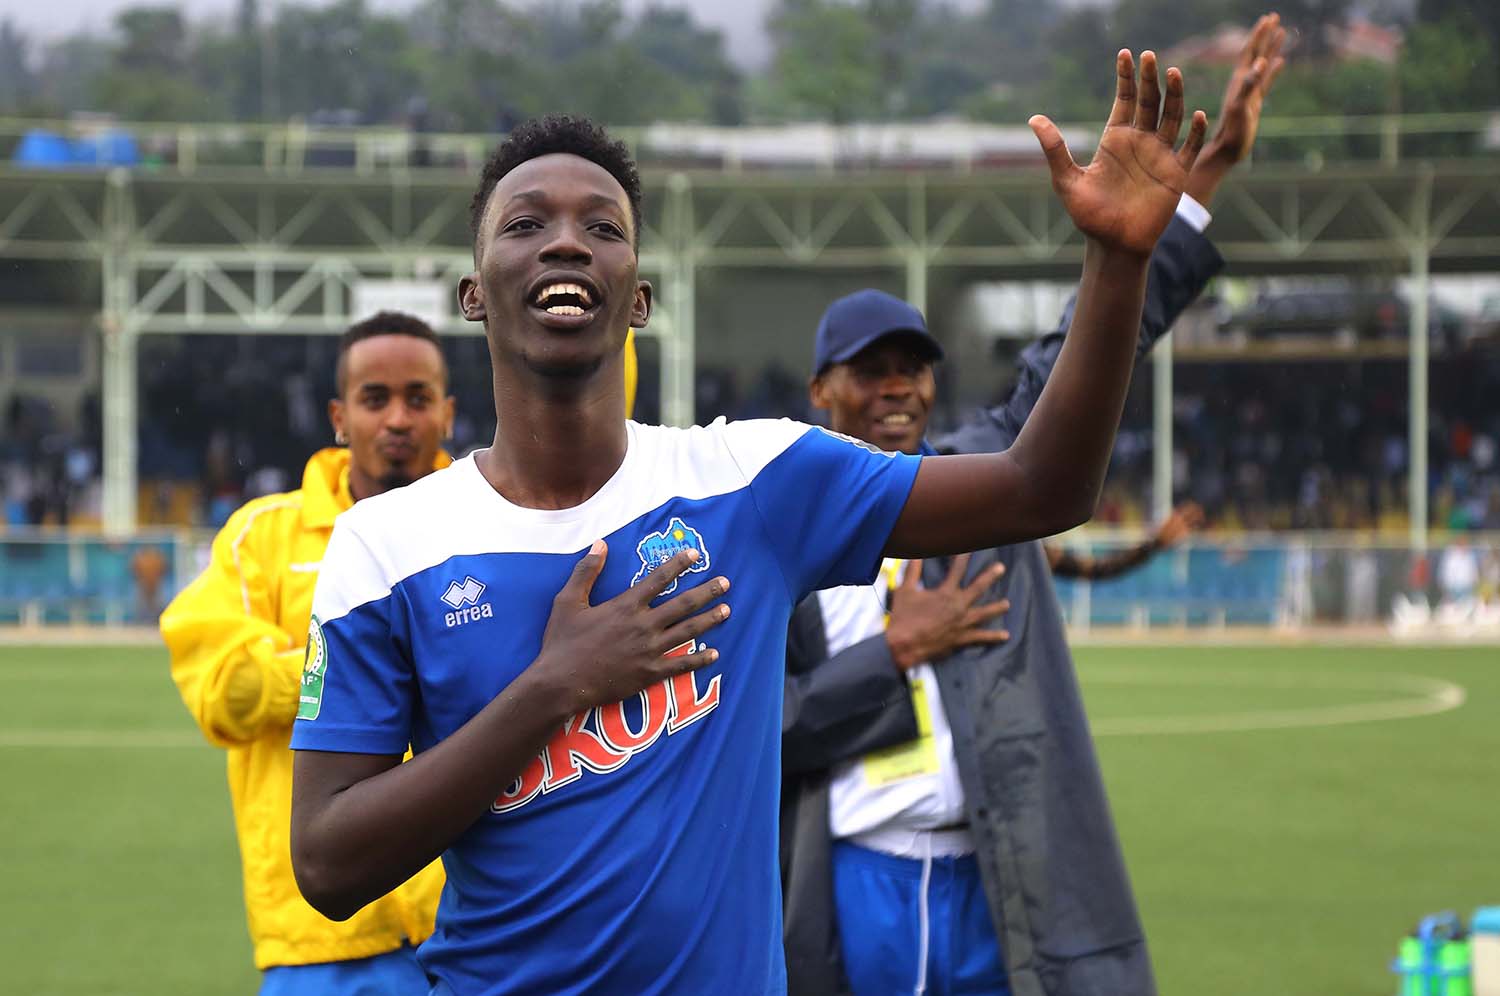 Bonfils Caleb Bimenyimana, 24, scored the goal that powered Rayon Sports to the quarter-finals of the 2018 Caf Confederation Cup. Photo: File.